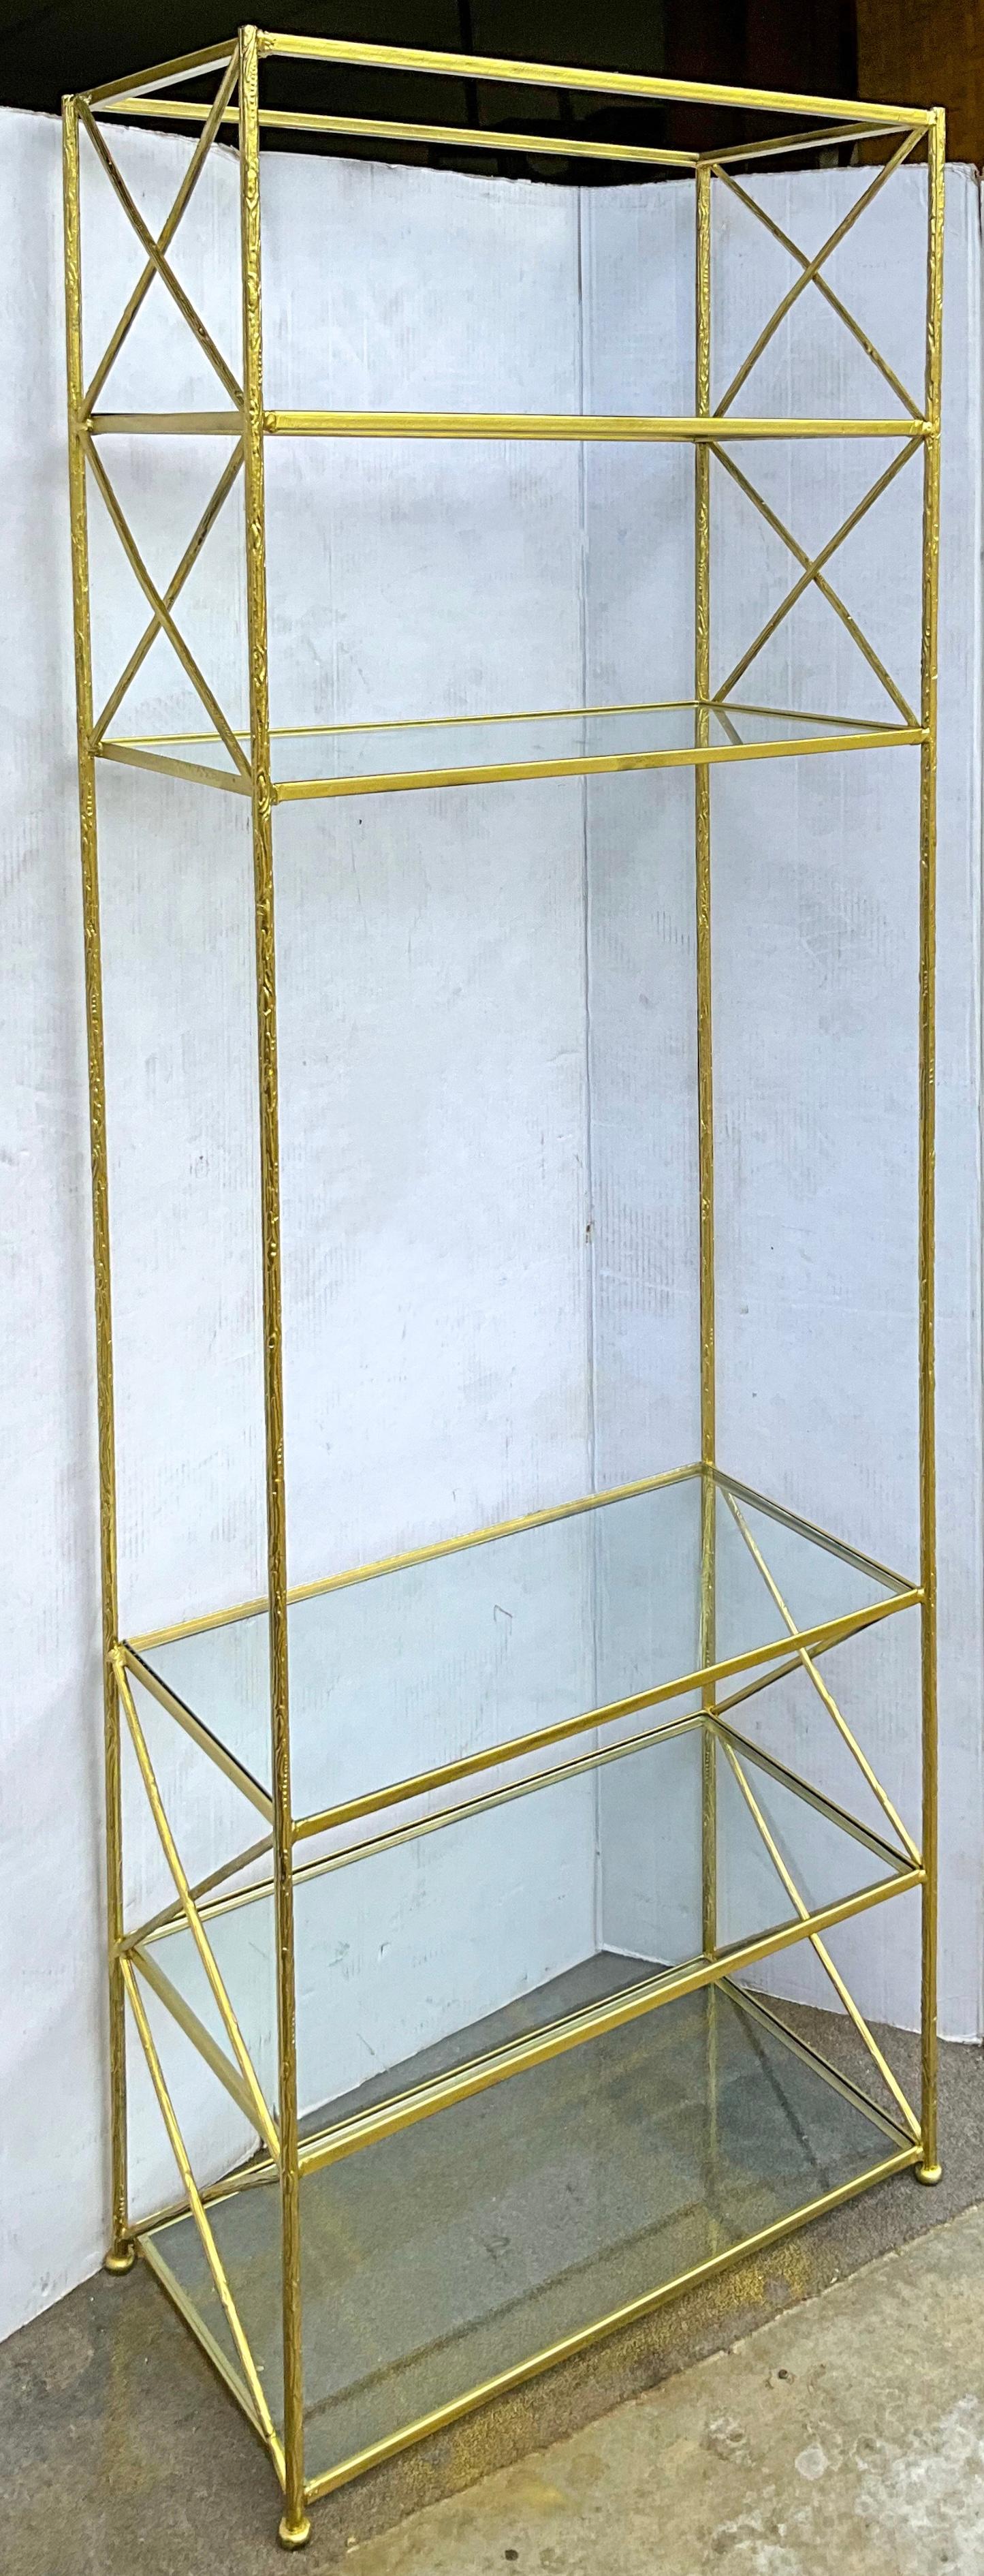 1970s Maison Jansen Inspired Gilt Metal Faux Bois Etageres / Bookcases - Pair In Good Condition For Sale In Kennesaw, GA